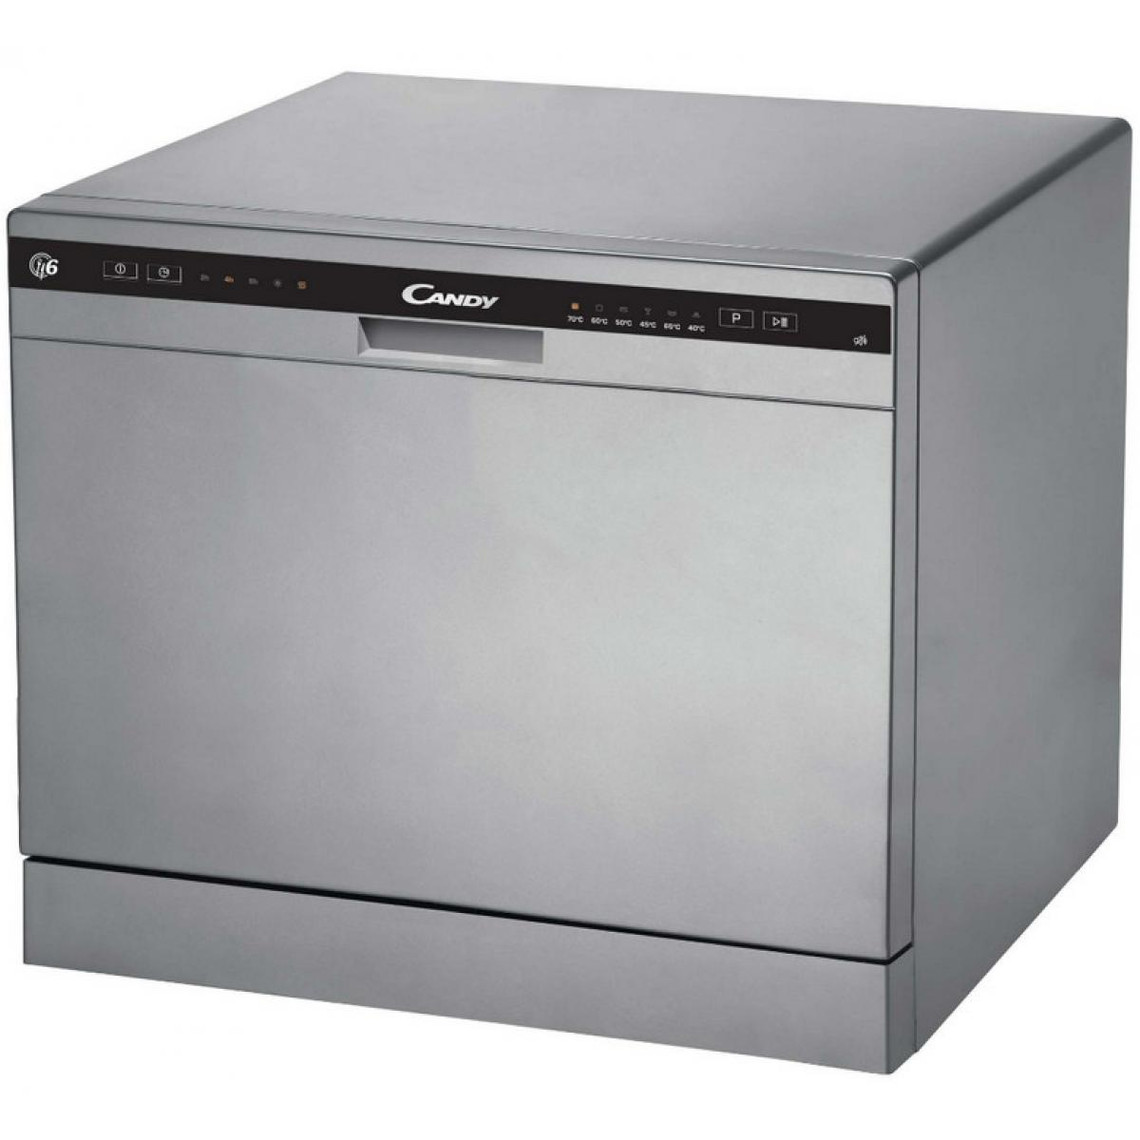 Candy Lave-vaisselle compact 6 couverts 51db - cdcp6s - CANDY